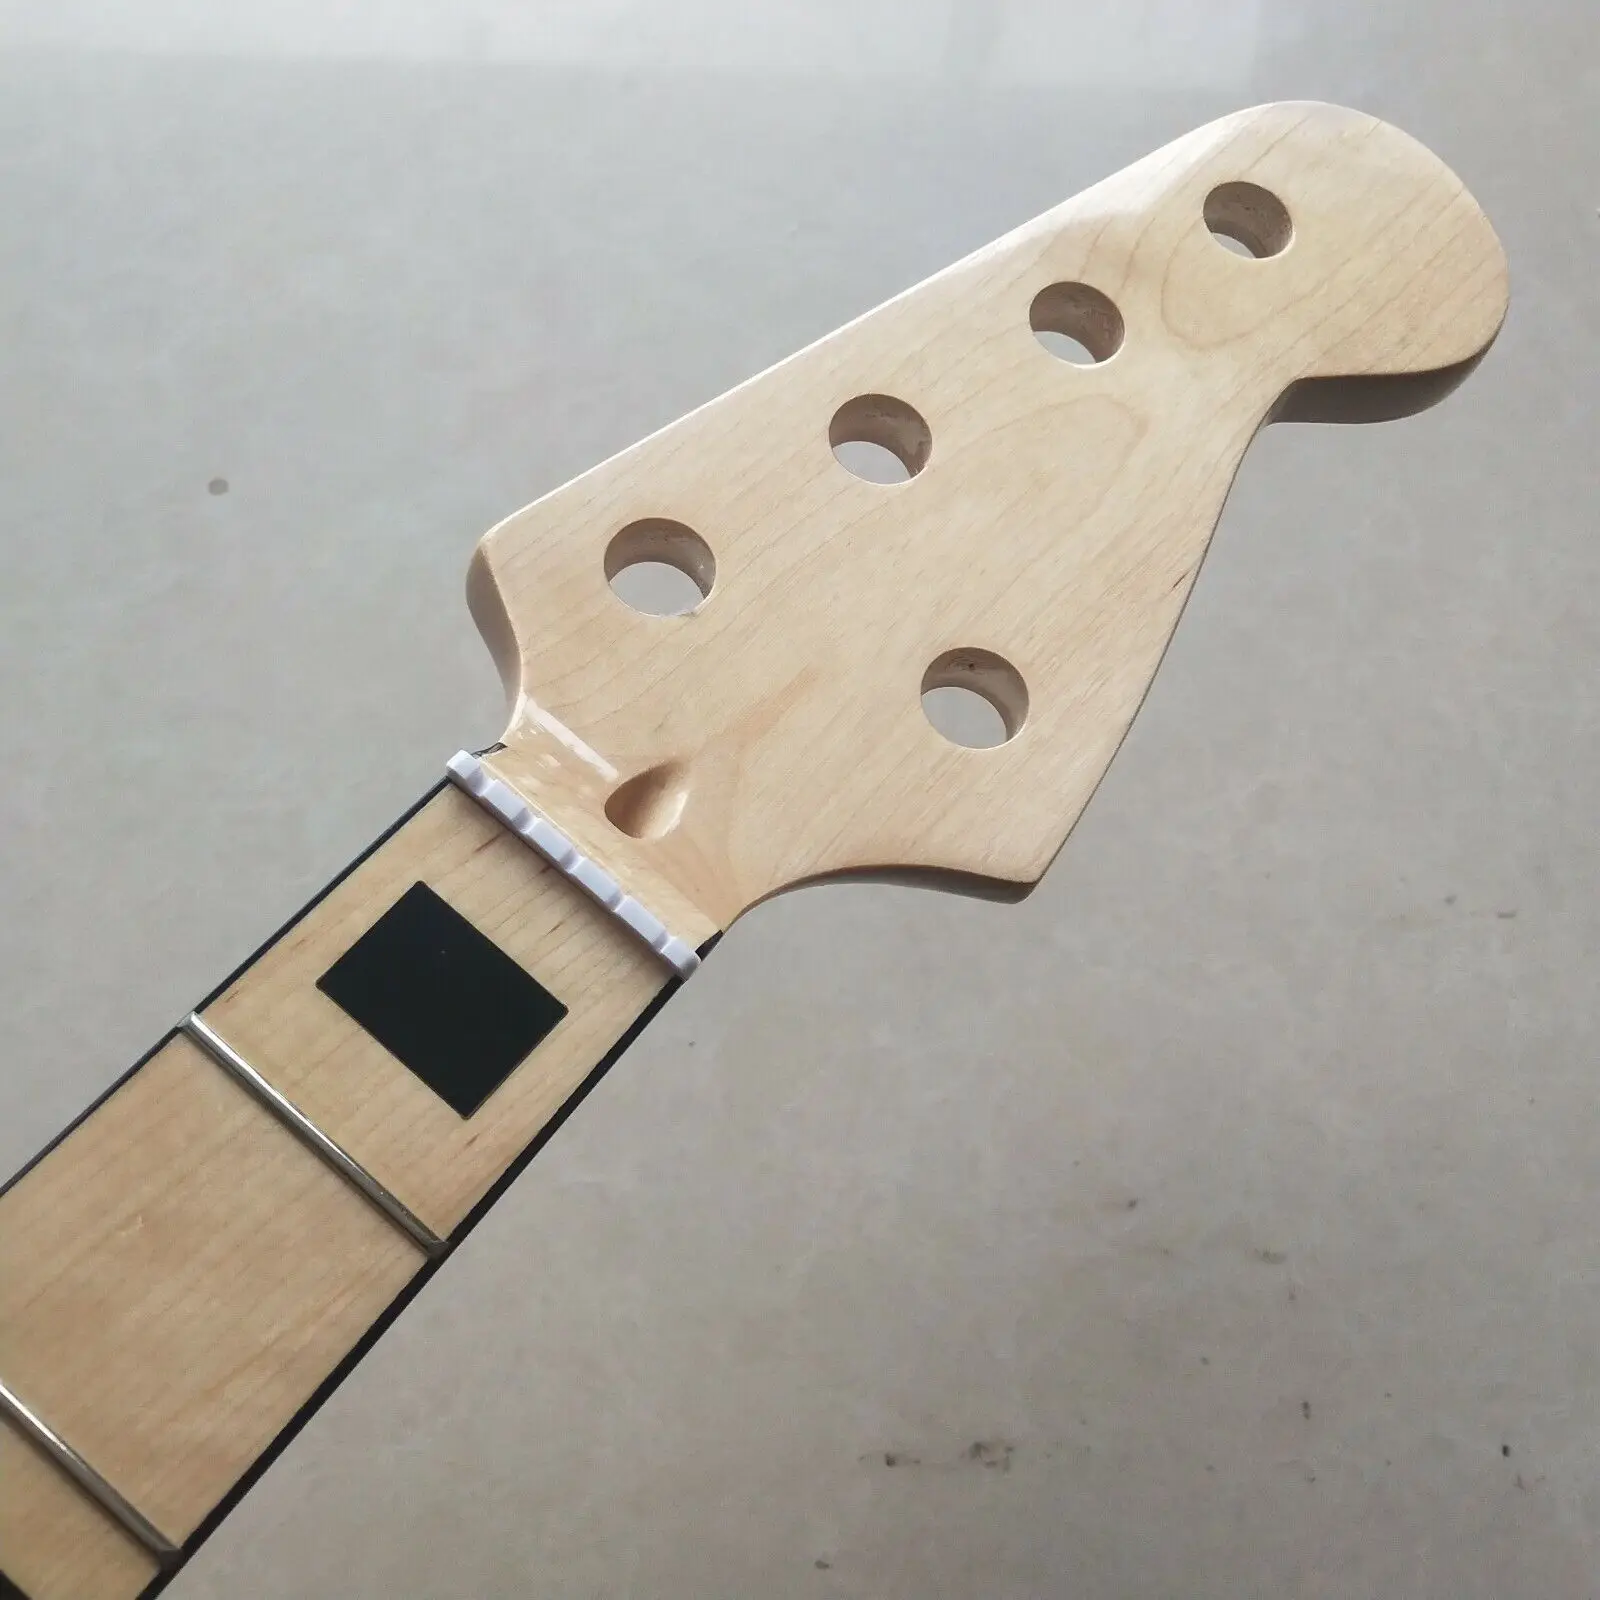 Enlarge Gloss 5 String Bass Guitar Neck 20 fret 34inch Maple Fretboard Block inlay parts